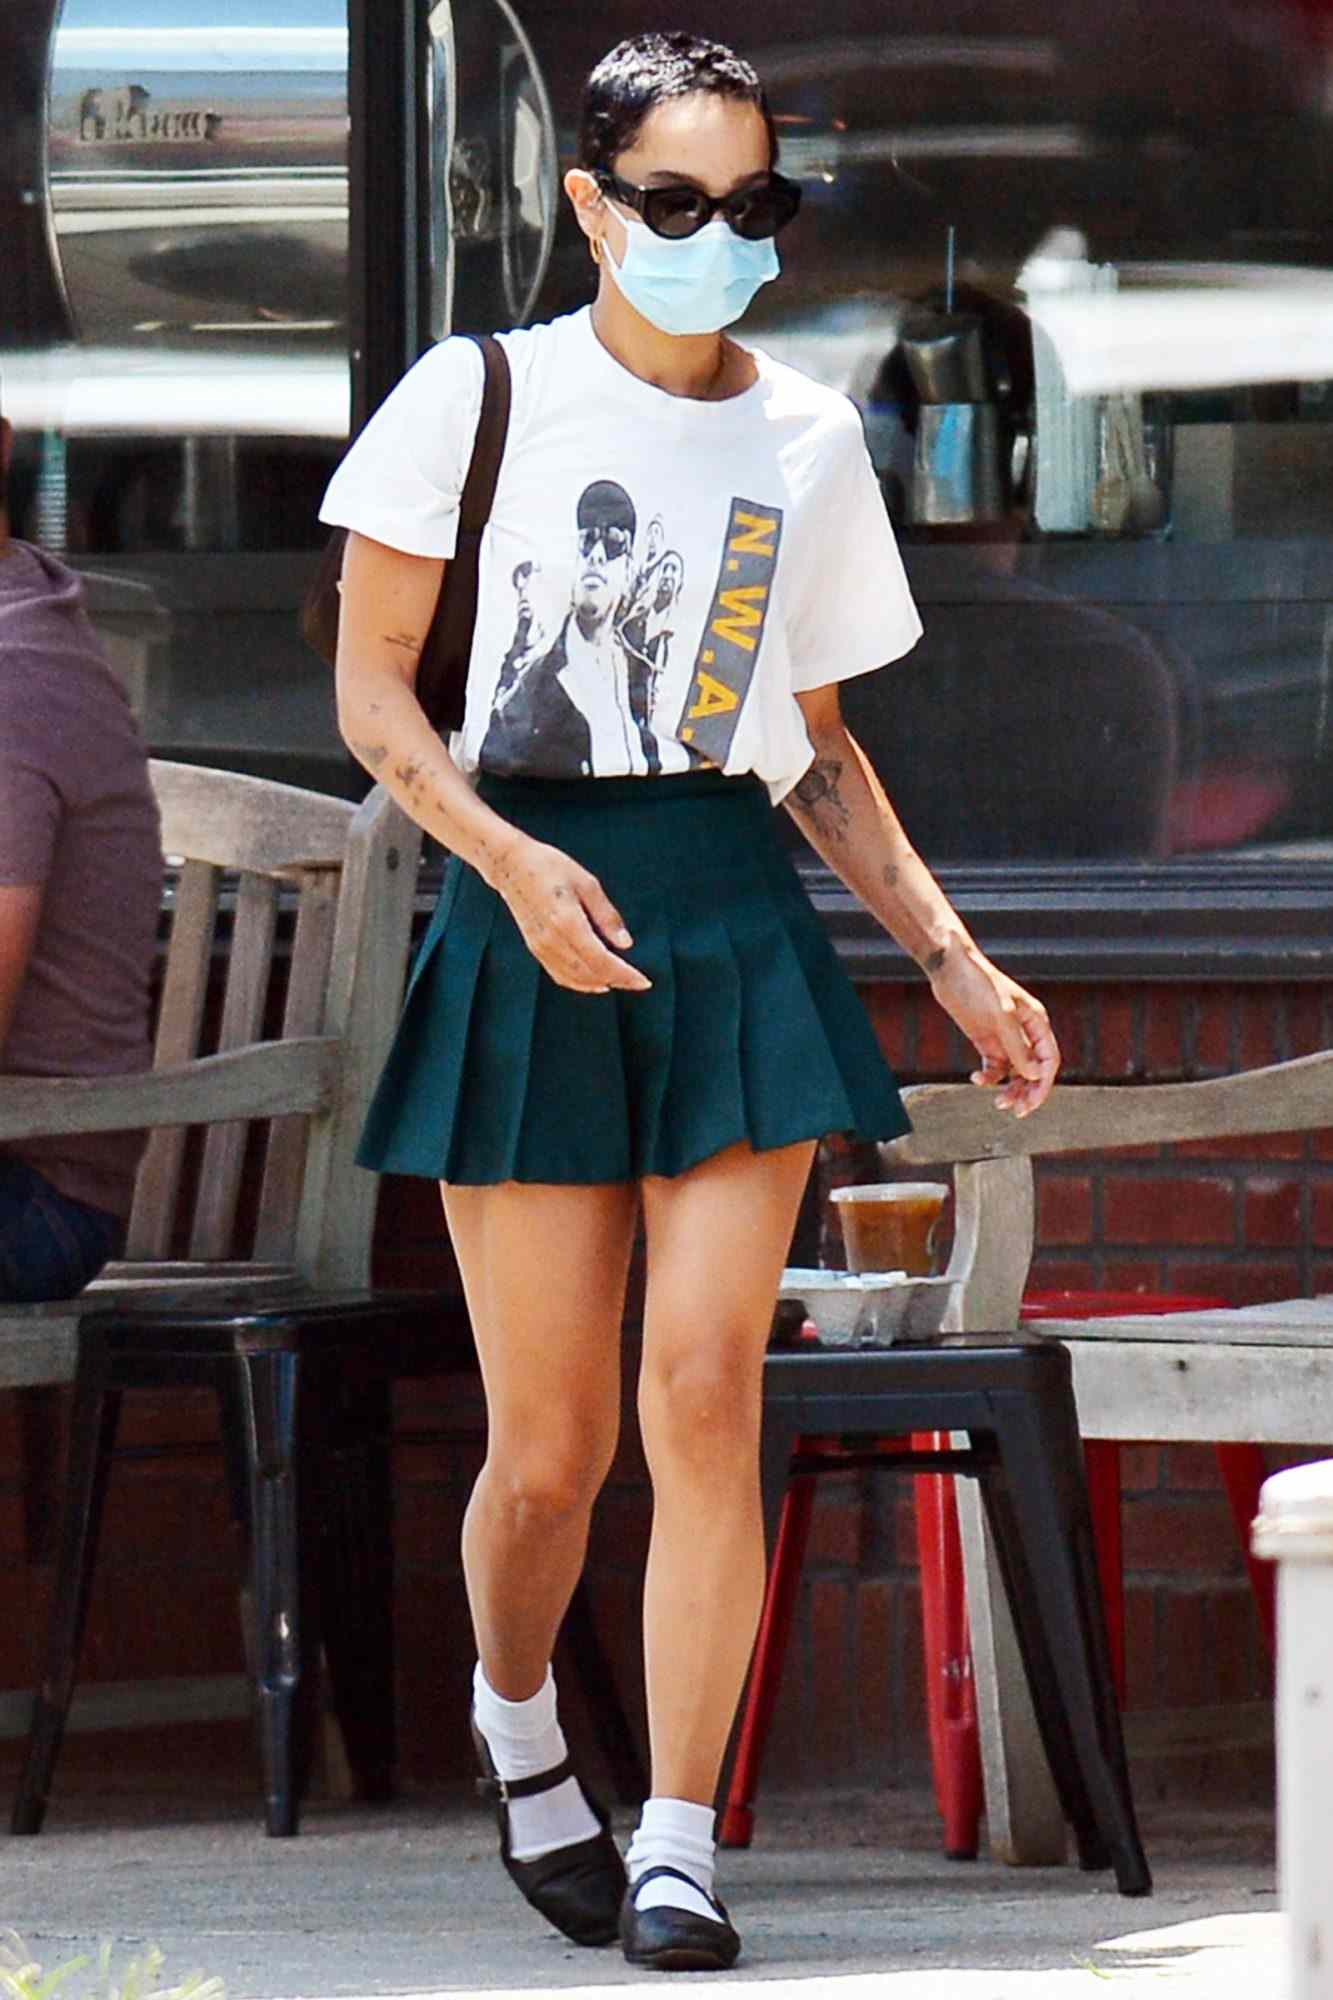 Zoe Kravitz Heads Out For Coffee Wearing a Graphic Anti Police T-shirt in New York City.